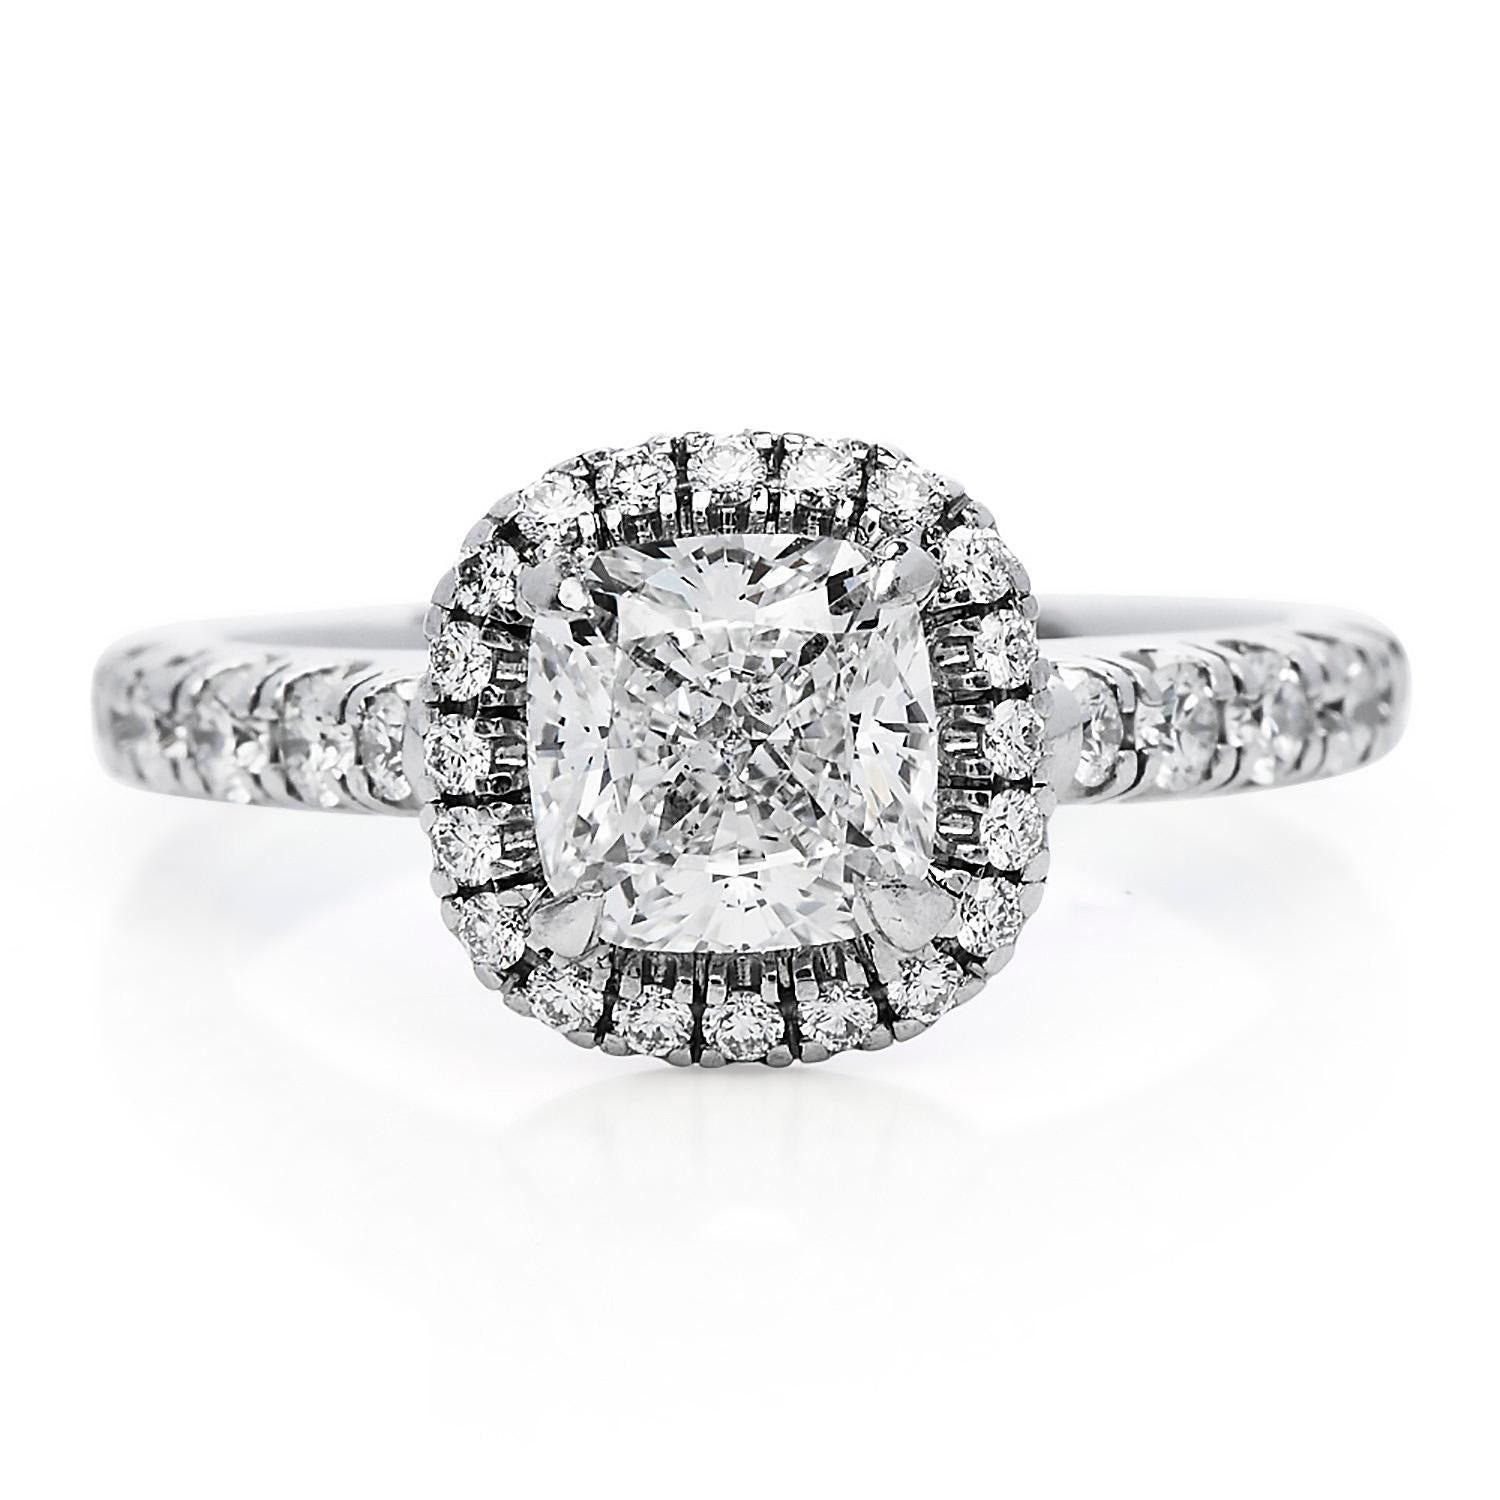 This classic Cartier Engagement ring is crafted in solid platinum,

Featuring a Center Diamond GIA Certified, 1.03 carats Cushion Cut,  F Color VVS 2 Clarity.

Pave set with 26 high-quality round-cut diamonds of approx. ---cts, E-F  color VVS1